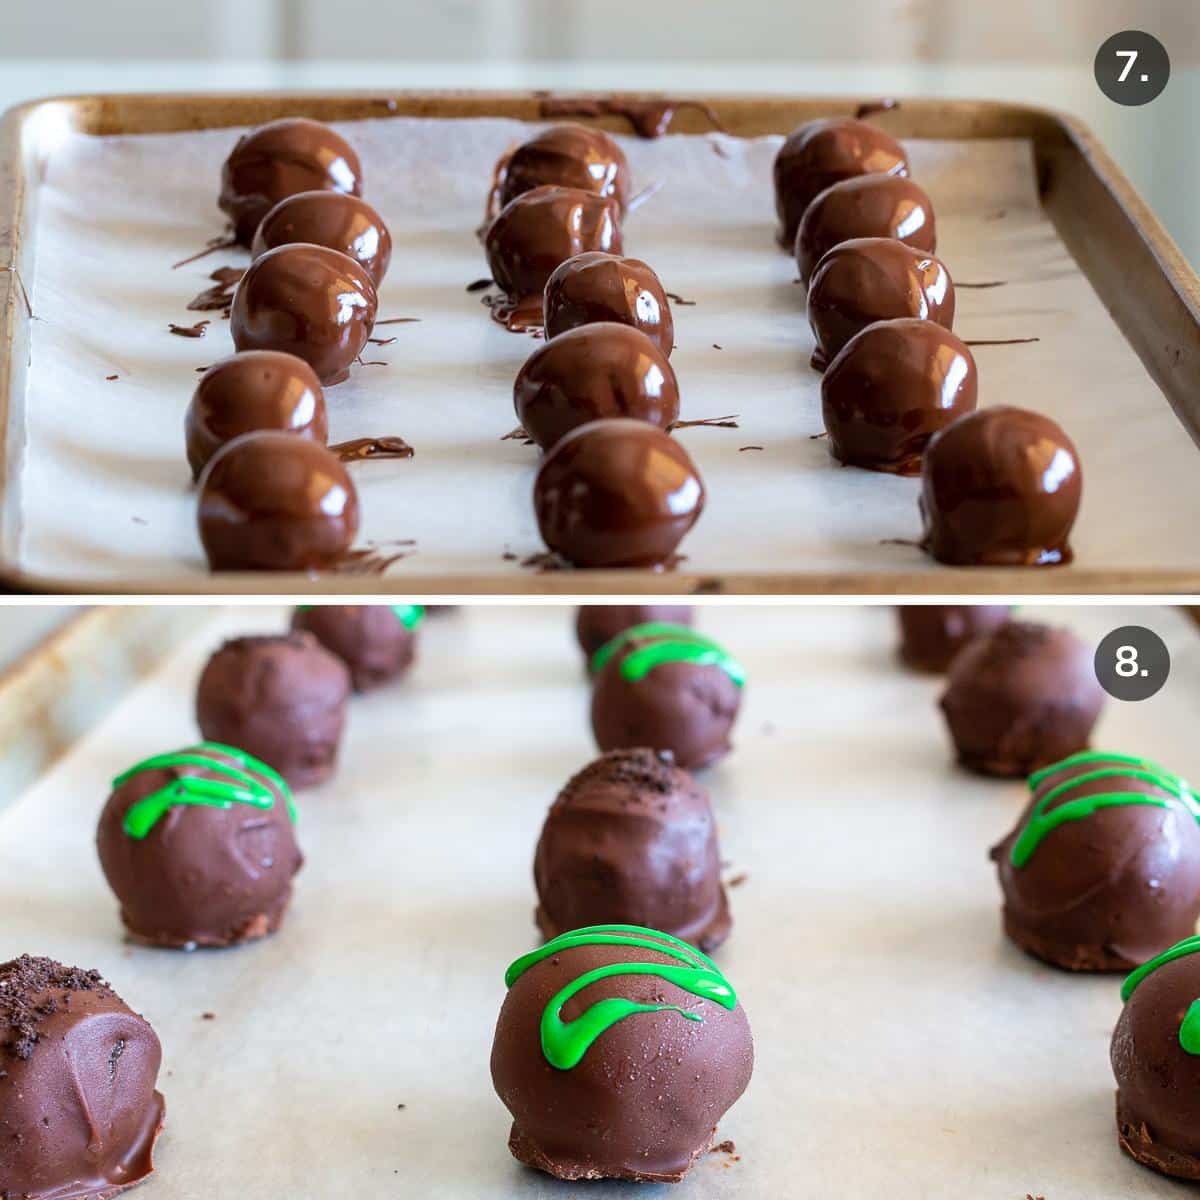 Vegan mint truffles dipped into chocolate and then decorated with sprinkles and green icing.